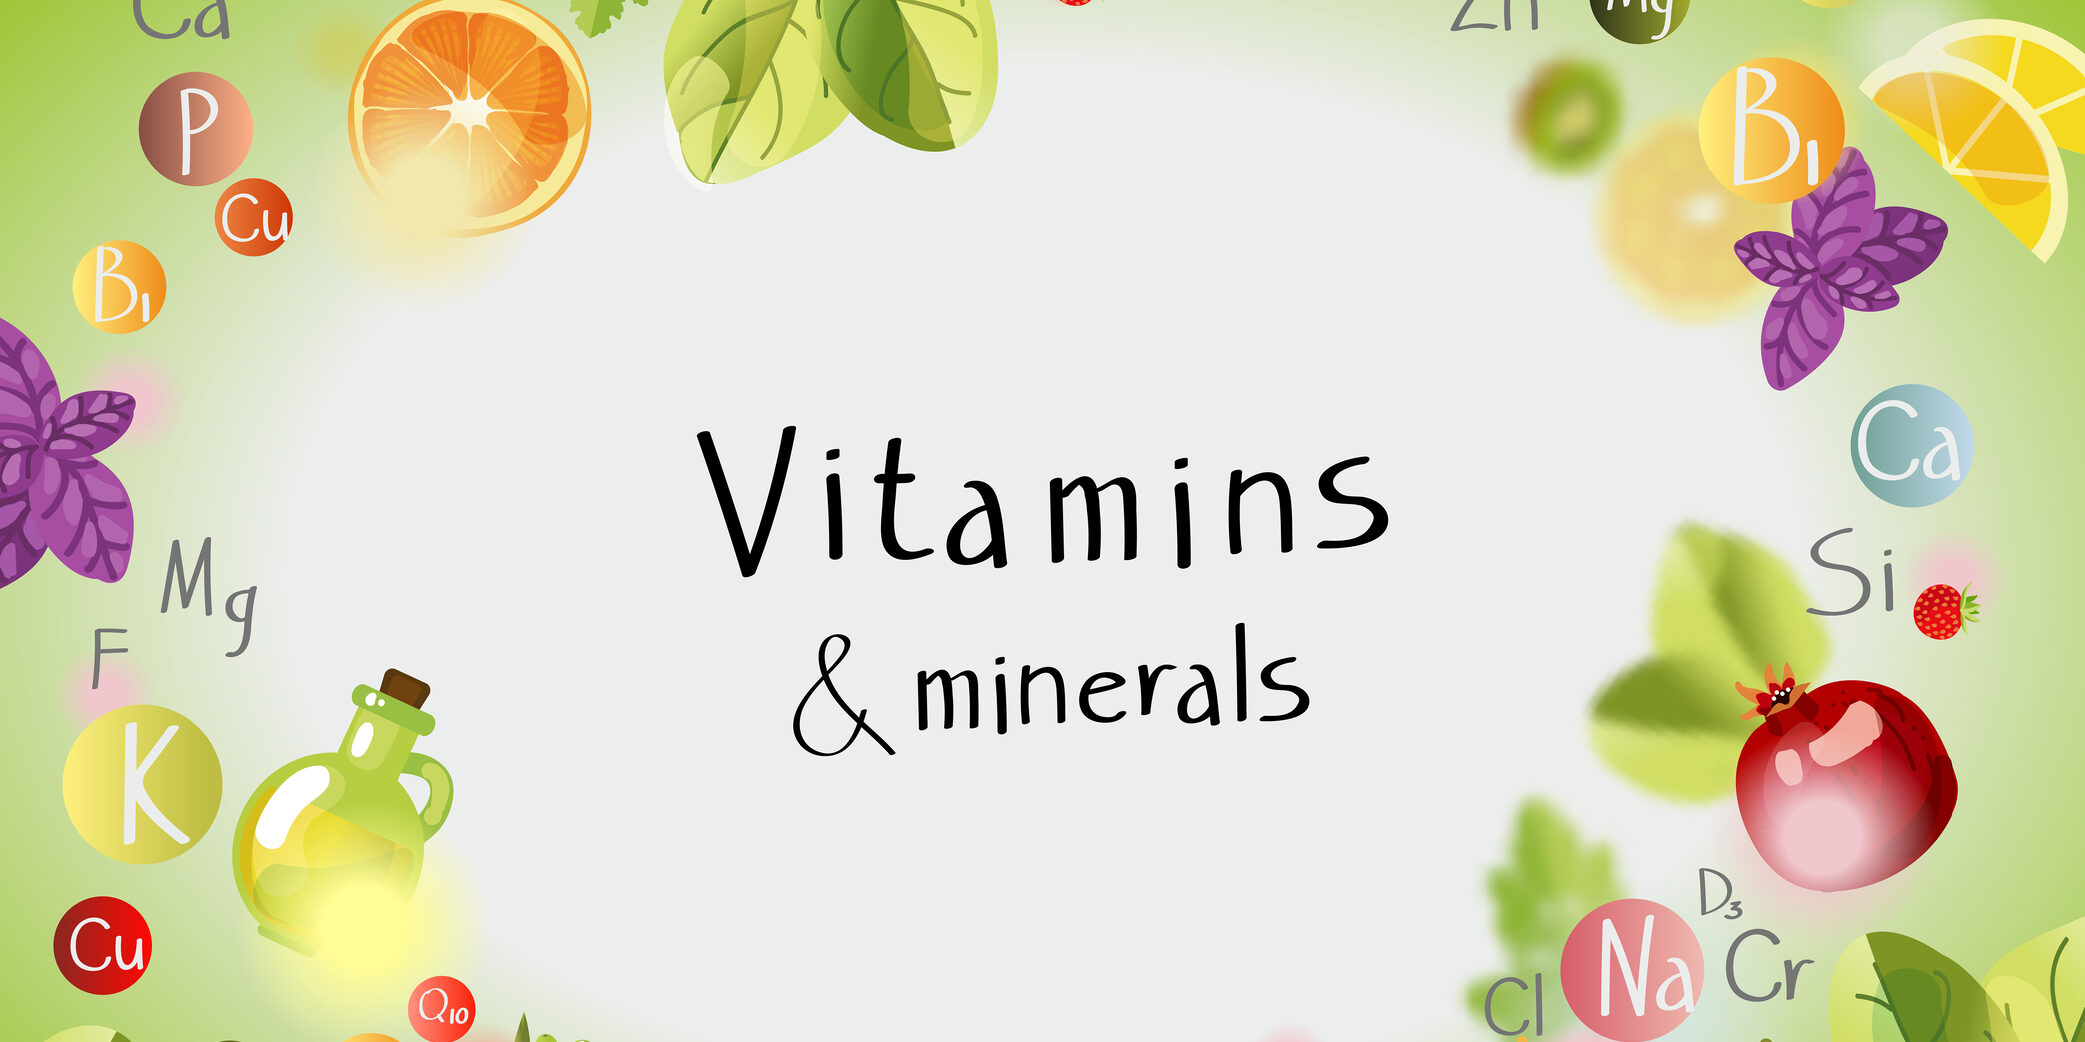 Important Vitamins and Minerals that helps as supplements for Rare Diseases